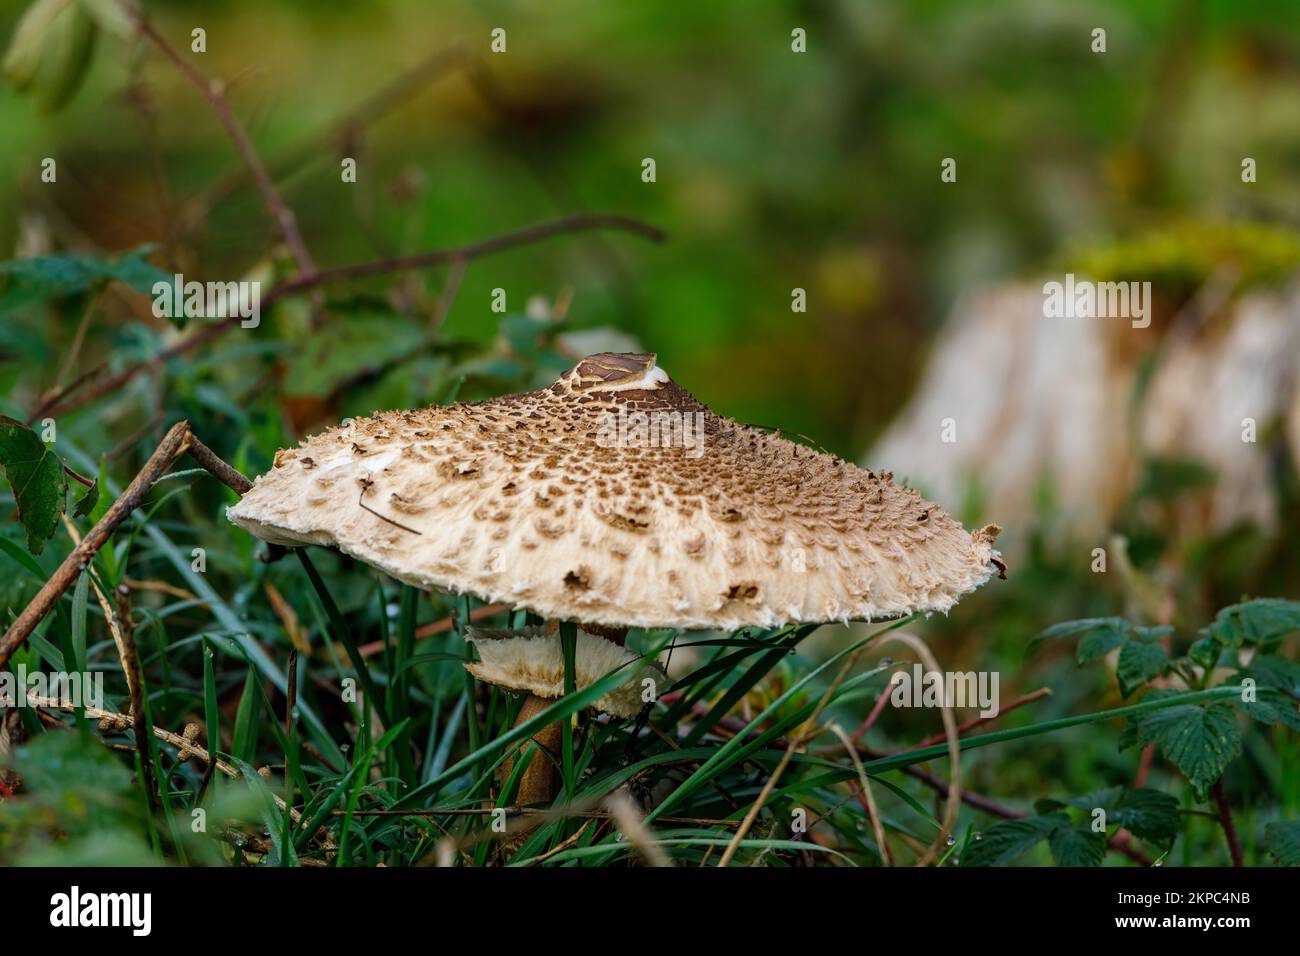 An edible parasol mushroom in the forest Stock Photo